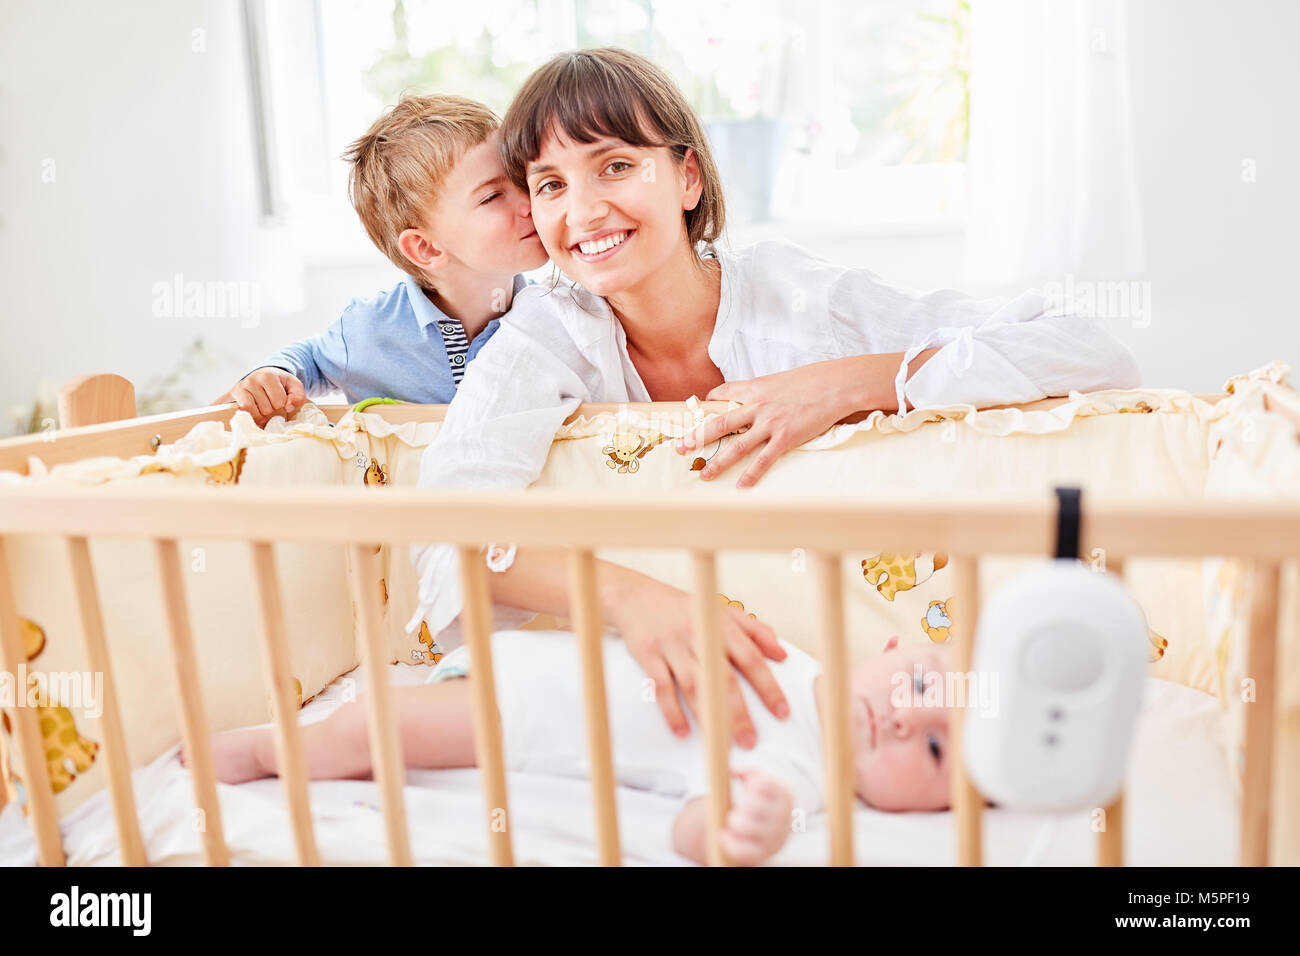 Little boy kisses his mother at the baby bed with newborn baby Stock Photo